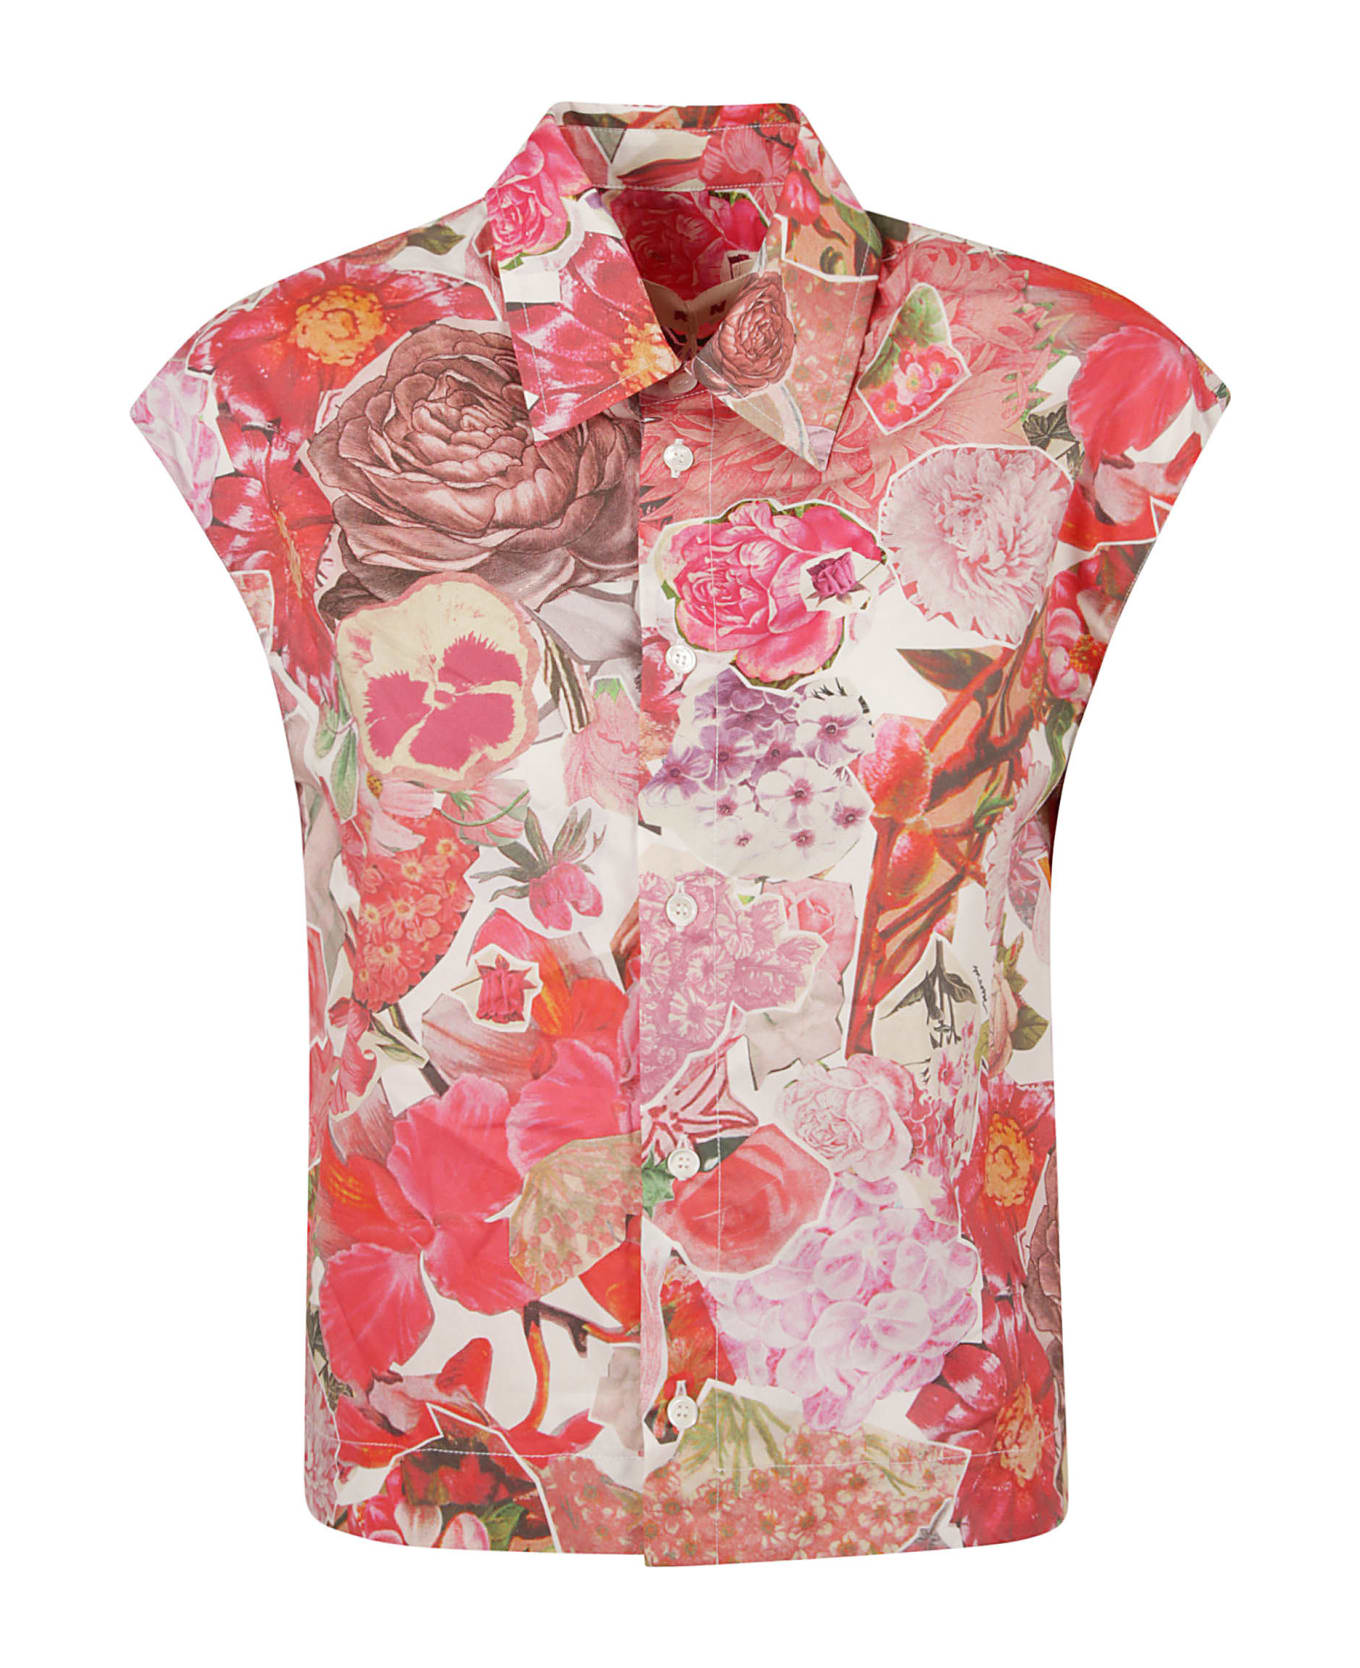 Marni Floral Capped Sleeve Shirt - Pink